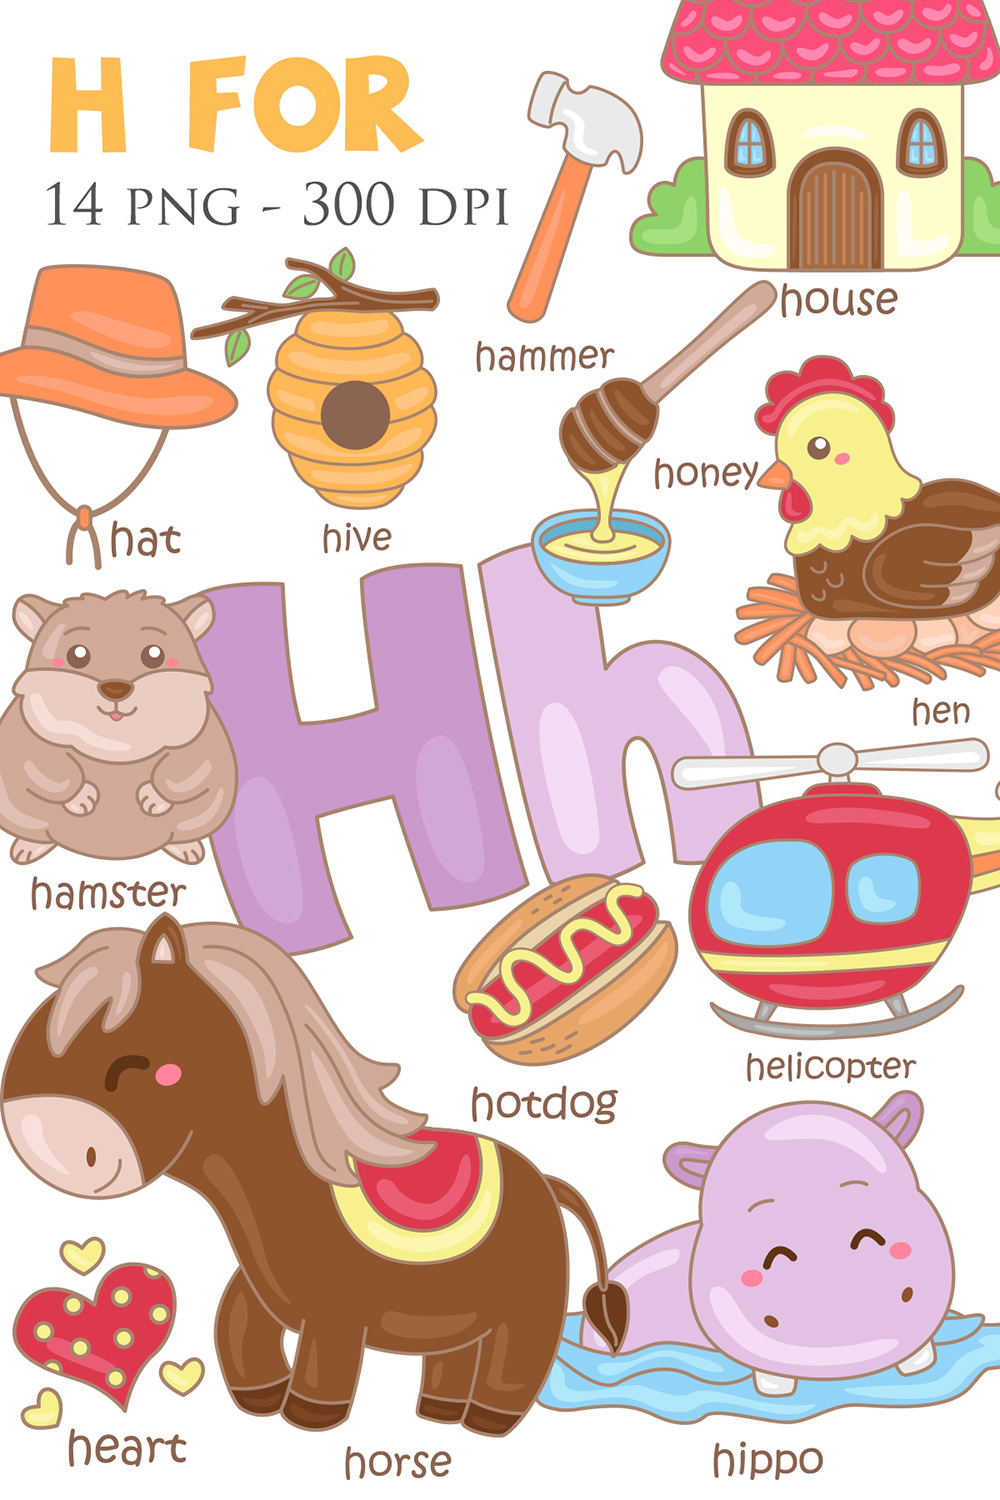 Alphabet H For Vocabulary School Letter Reading Writing Font Study Learning Student Toodler Kids Hive Hamster Heart Honey Horse House Hat Hotdog Hippo Helicopter Hen Cartoon Illustration Vector Clipart pinterest preview image.